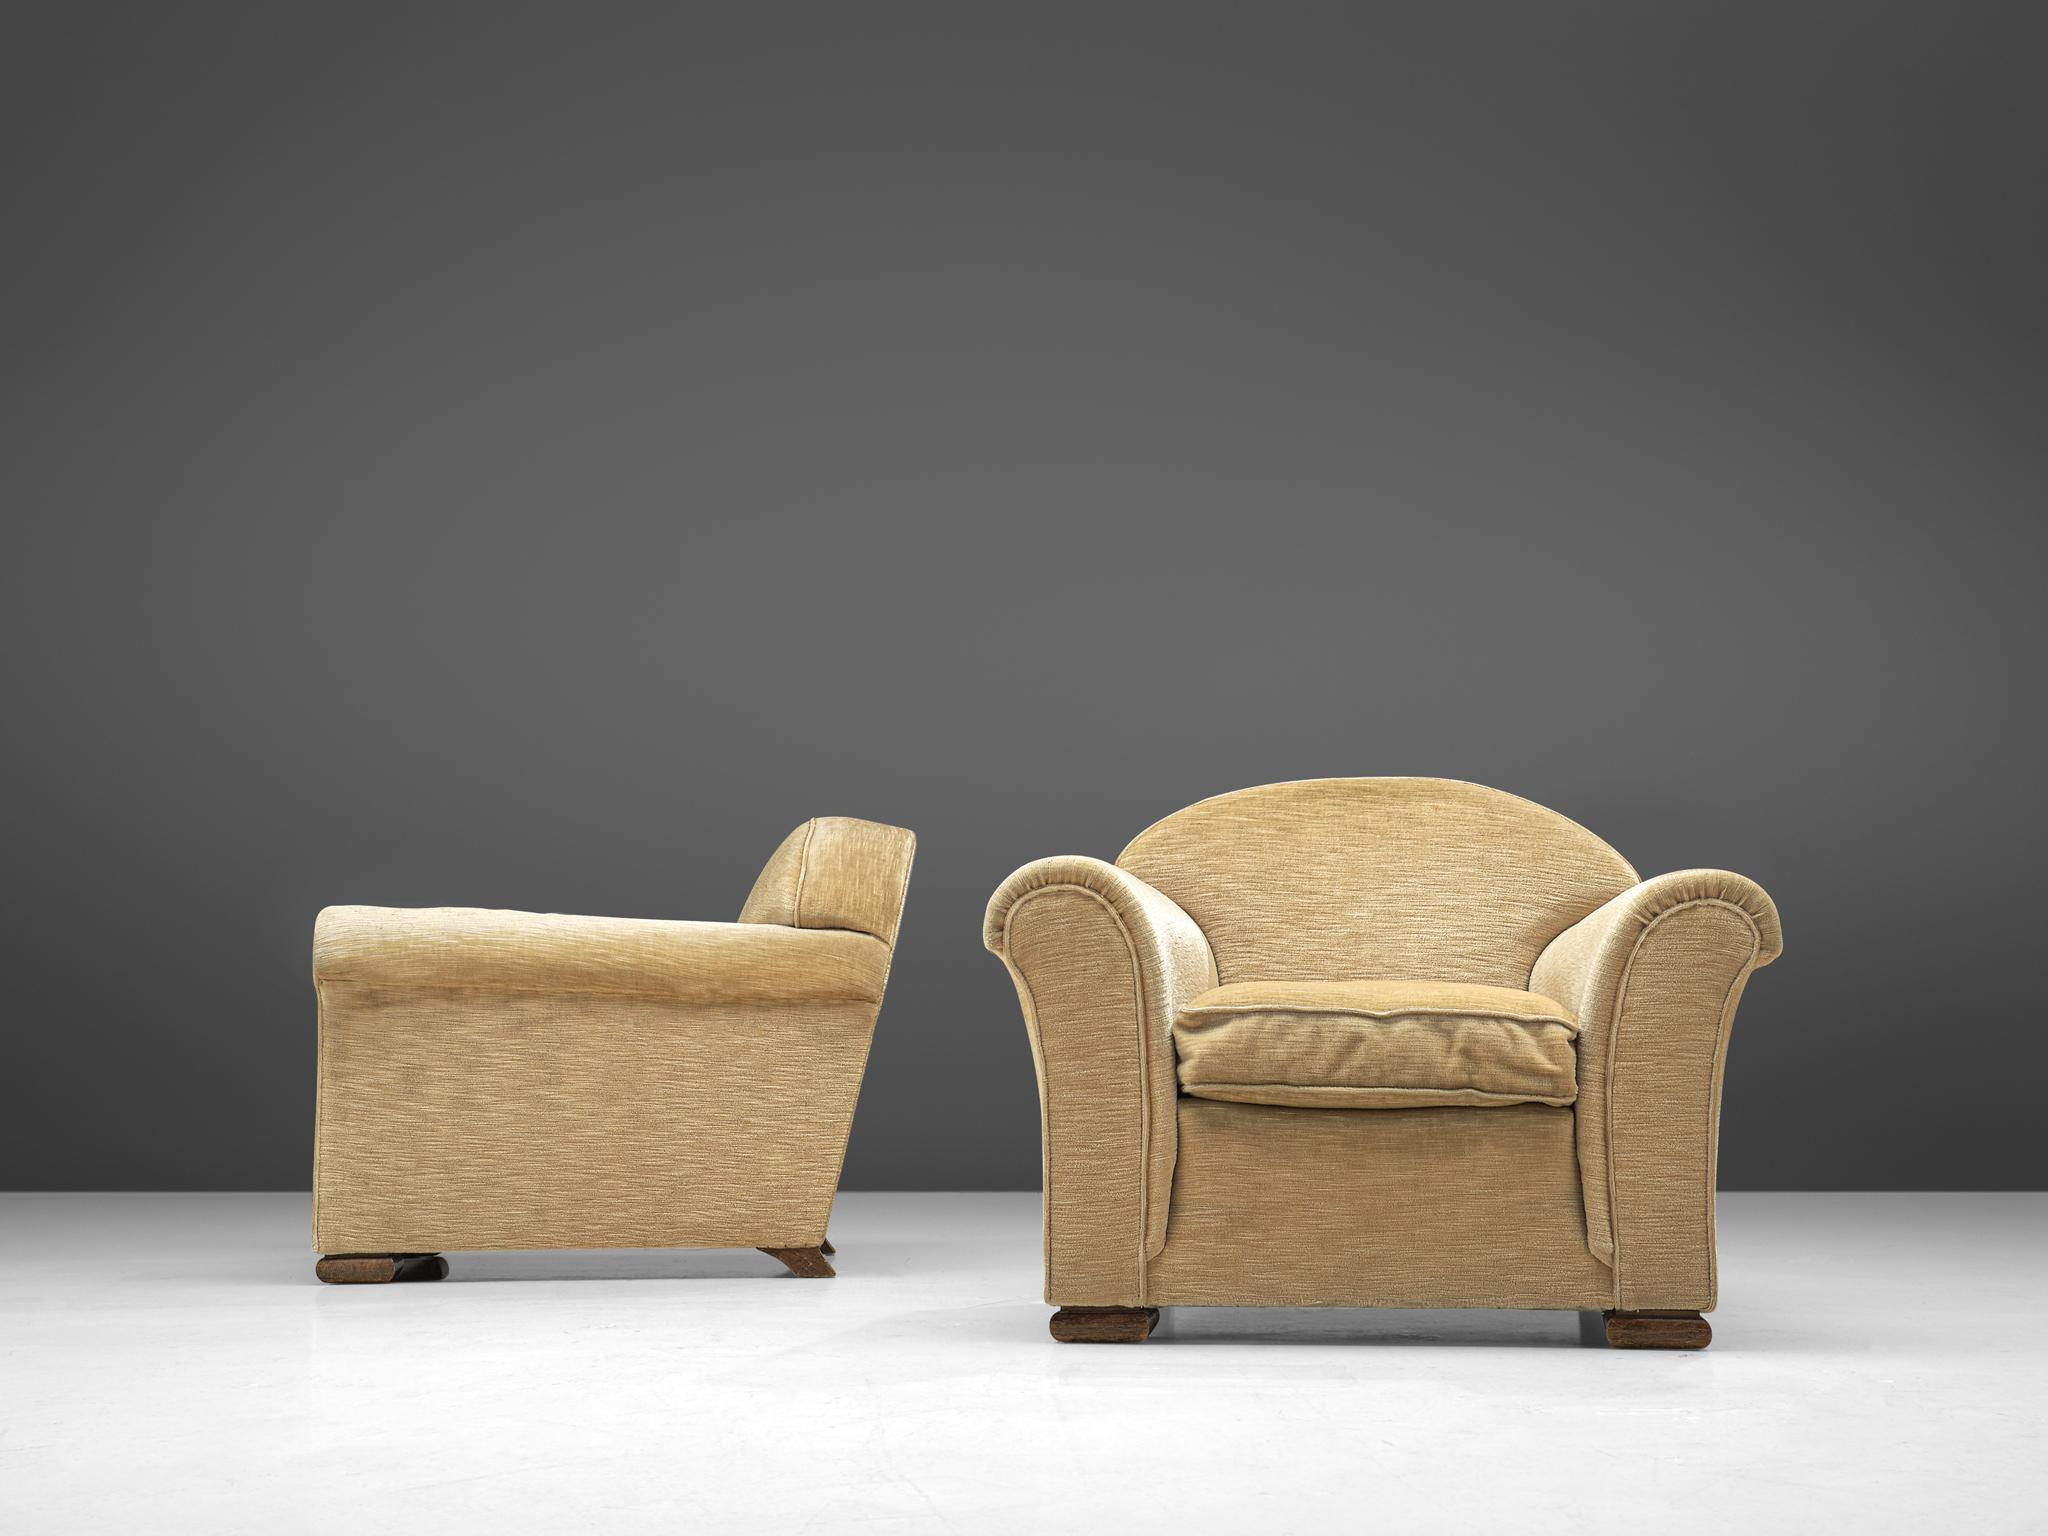 French Pair of Art Deco Lounge Chairs in Beige Upholstery  For Sale 3